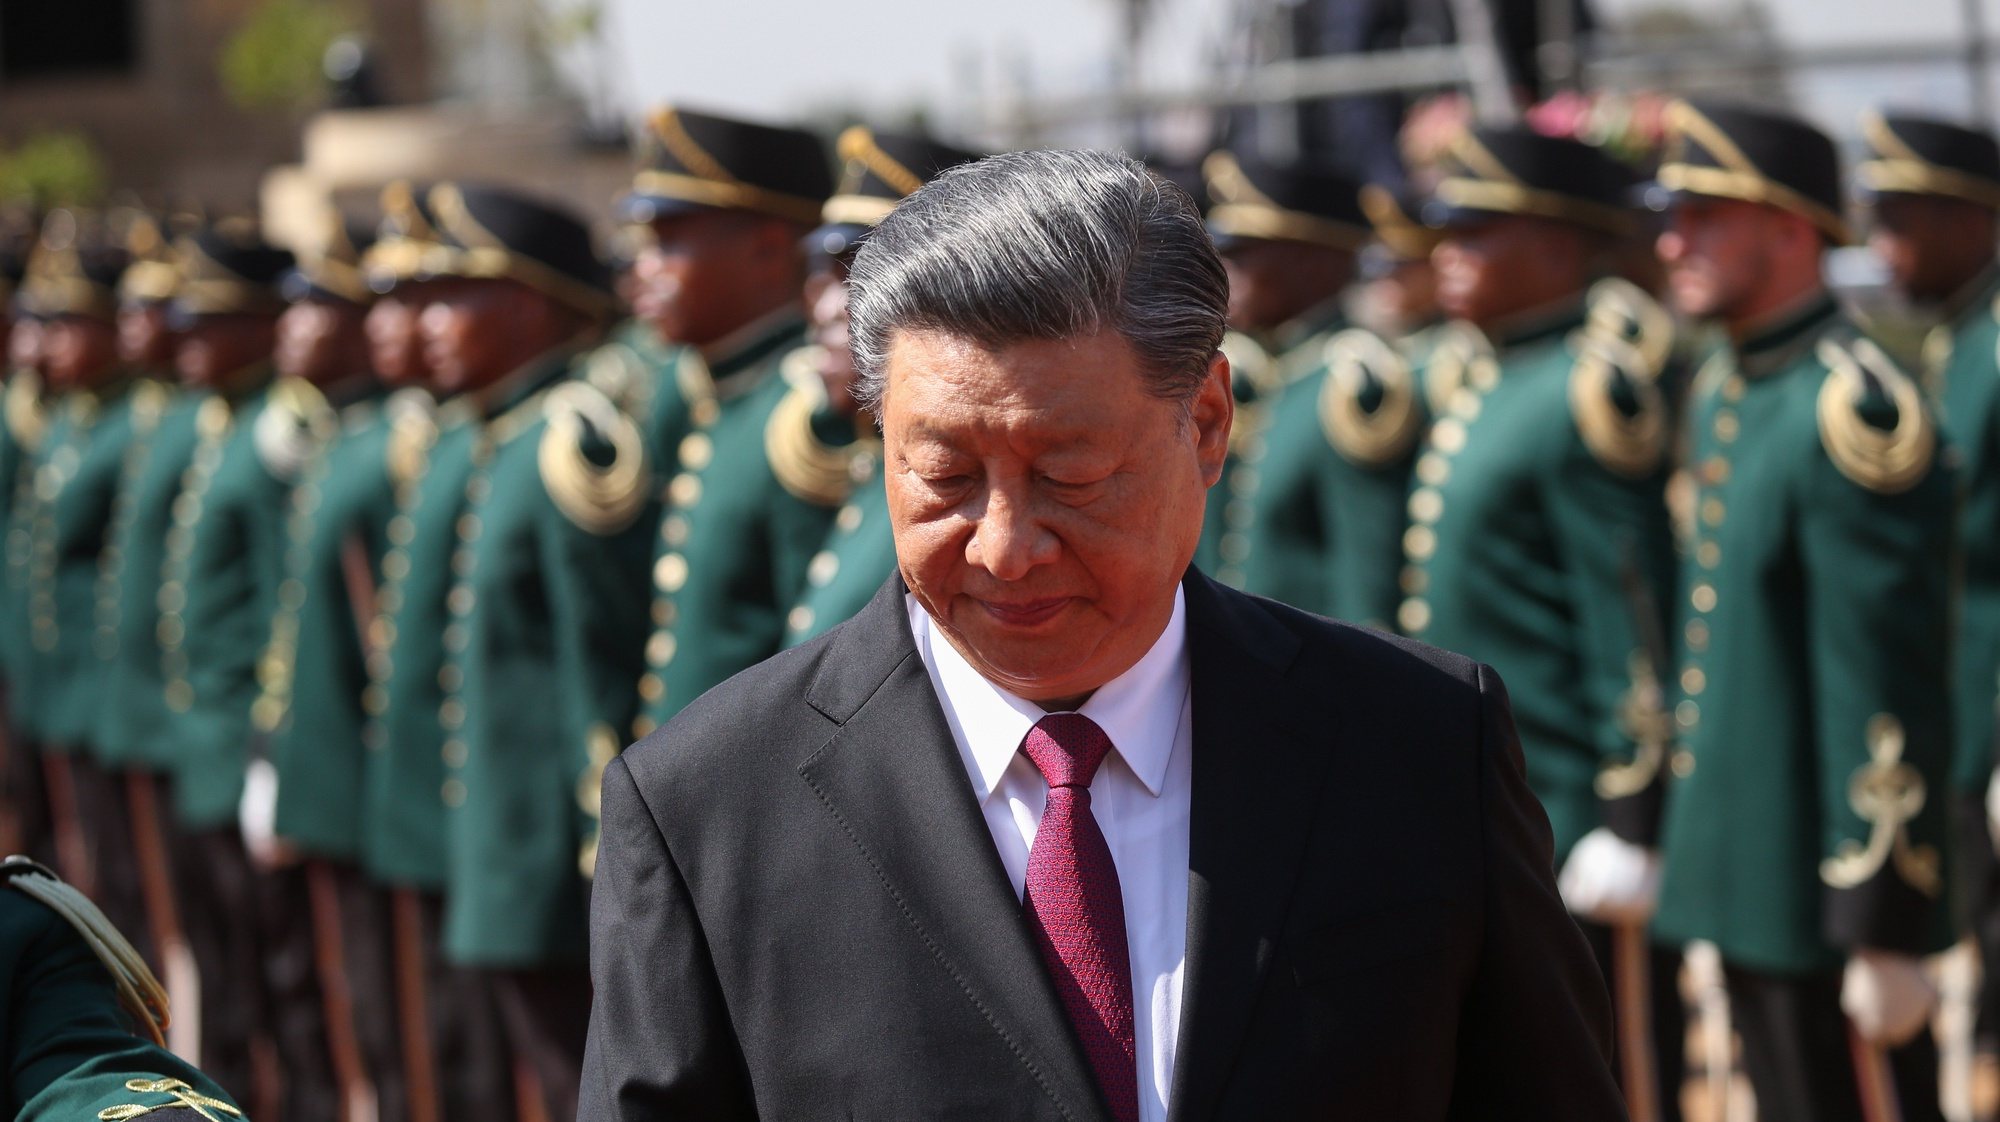 epa10813221 Chinese President Xi Jinping reviews honour guards as he arrives at the Union Buildings in Pretoria, South Africa, 22 August 2023. South Africa is hosting the 15th BRICS Summit starting on 22 August at the Sandton Convention Centre in Johannesburg, where emerging economies of Brazil, Russia, India, China and South Africa will get together. The Russian president will not attend the summit.  EPA/KIM LUDBROOK